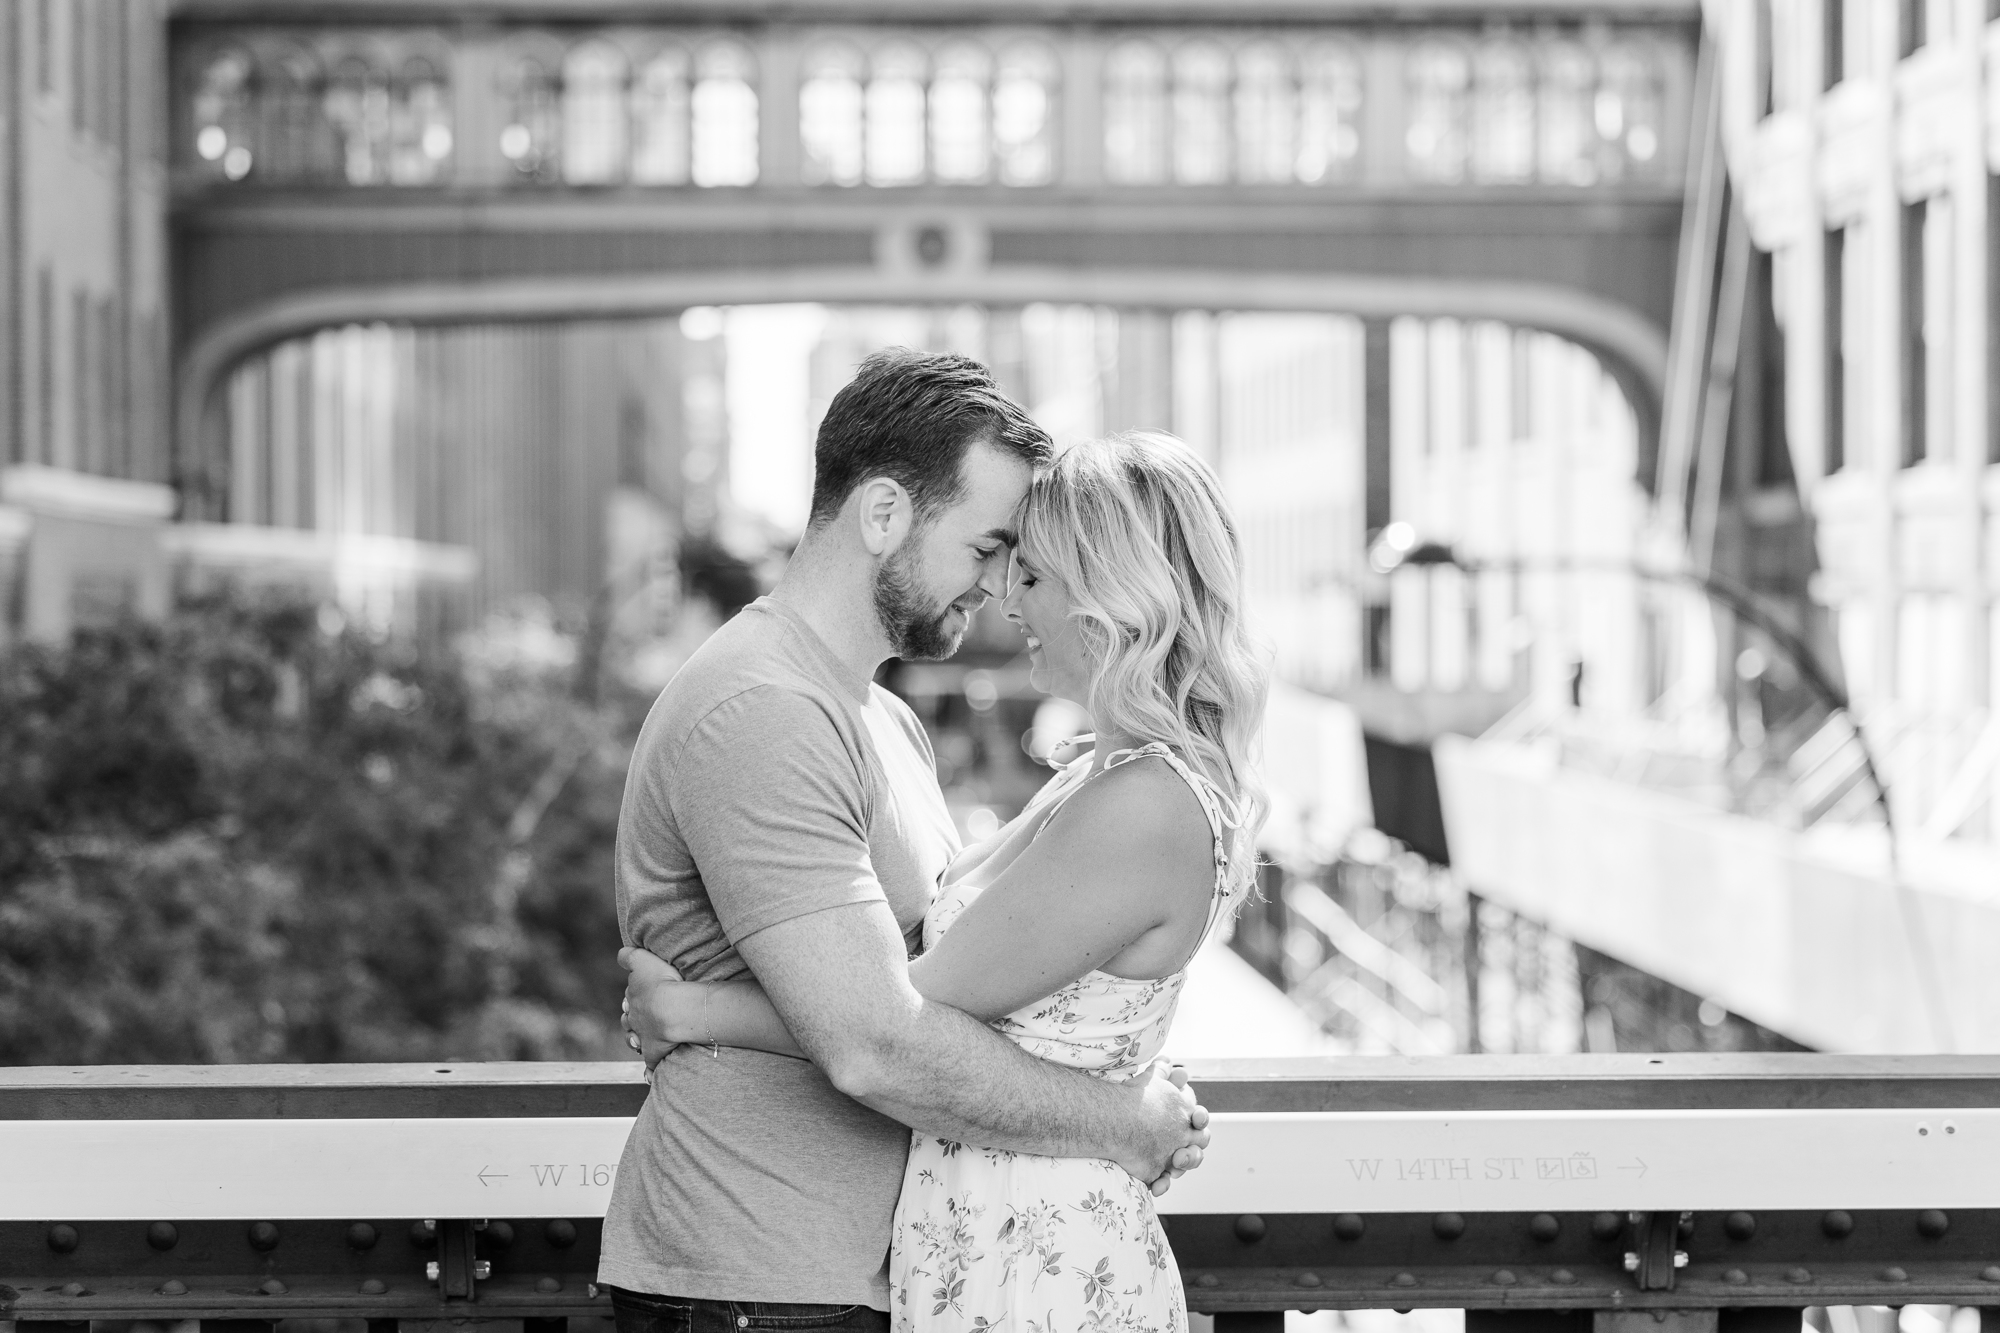 Radiant Summer Engagement Shoot on the High Line